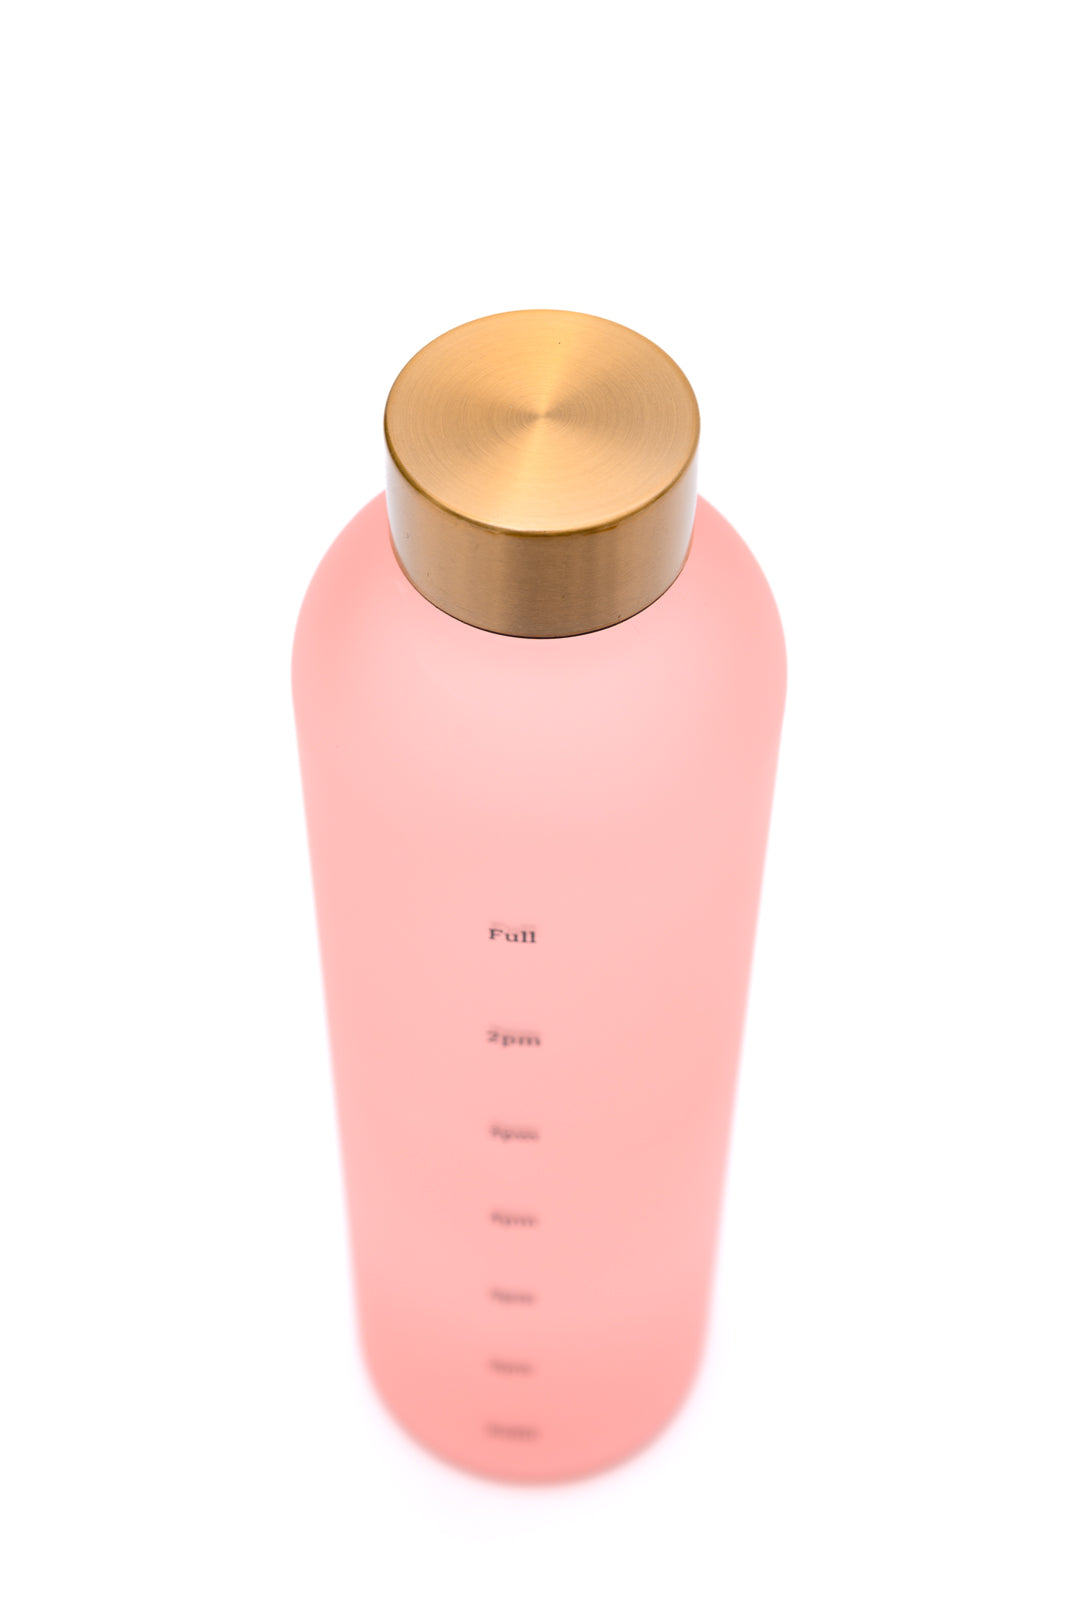 Sippin' Pretty 32 oz Translucent Water Bottle in Pink & Gold **FINAL SALE**